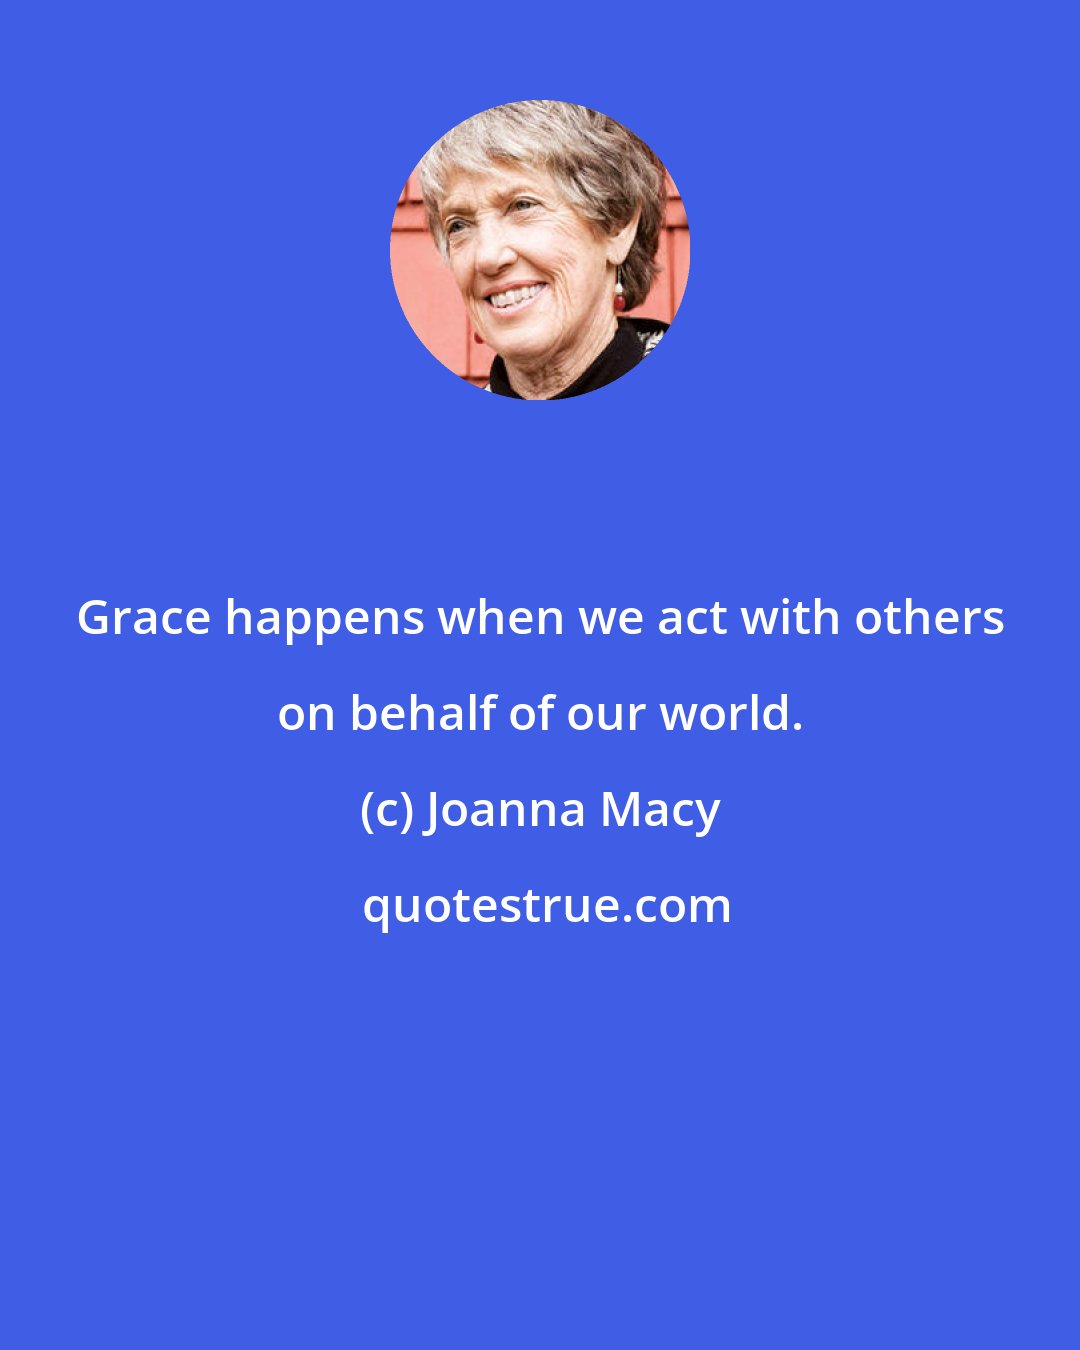 Joanna Macy: Grace happens when we act with others on behalf of our world.